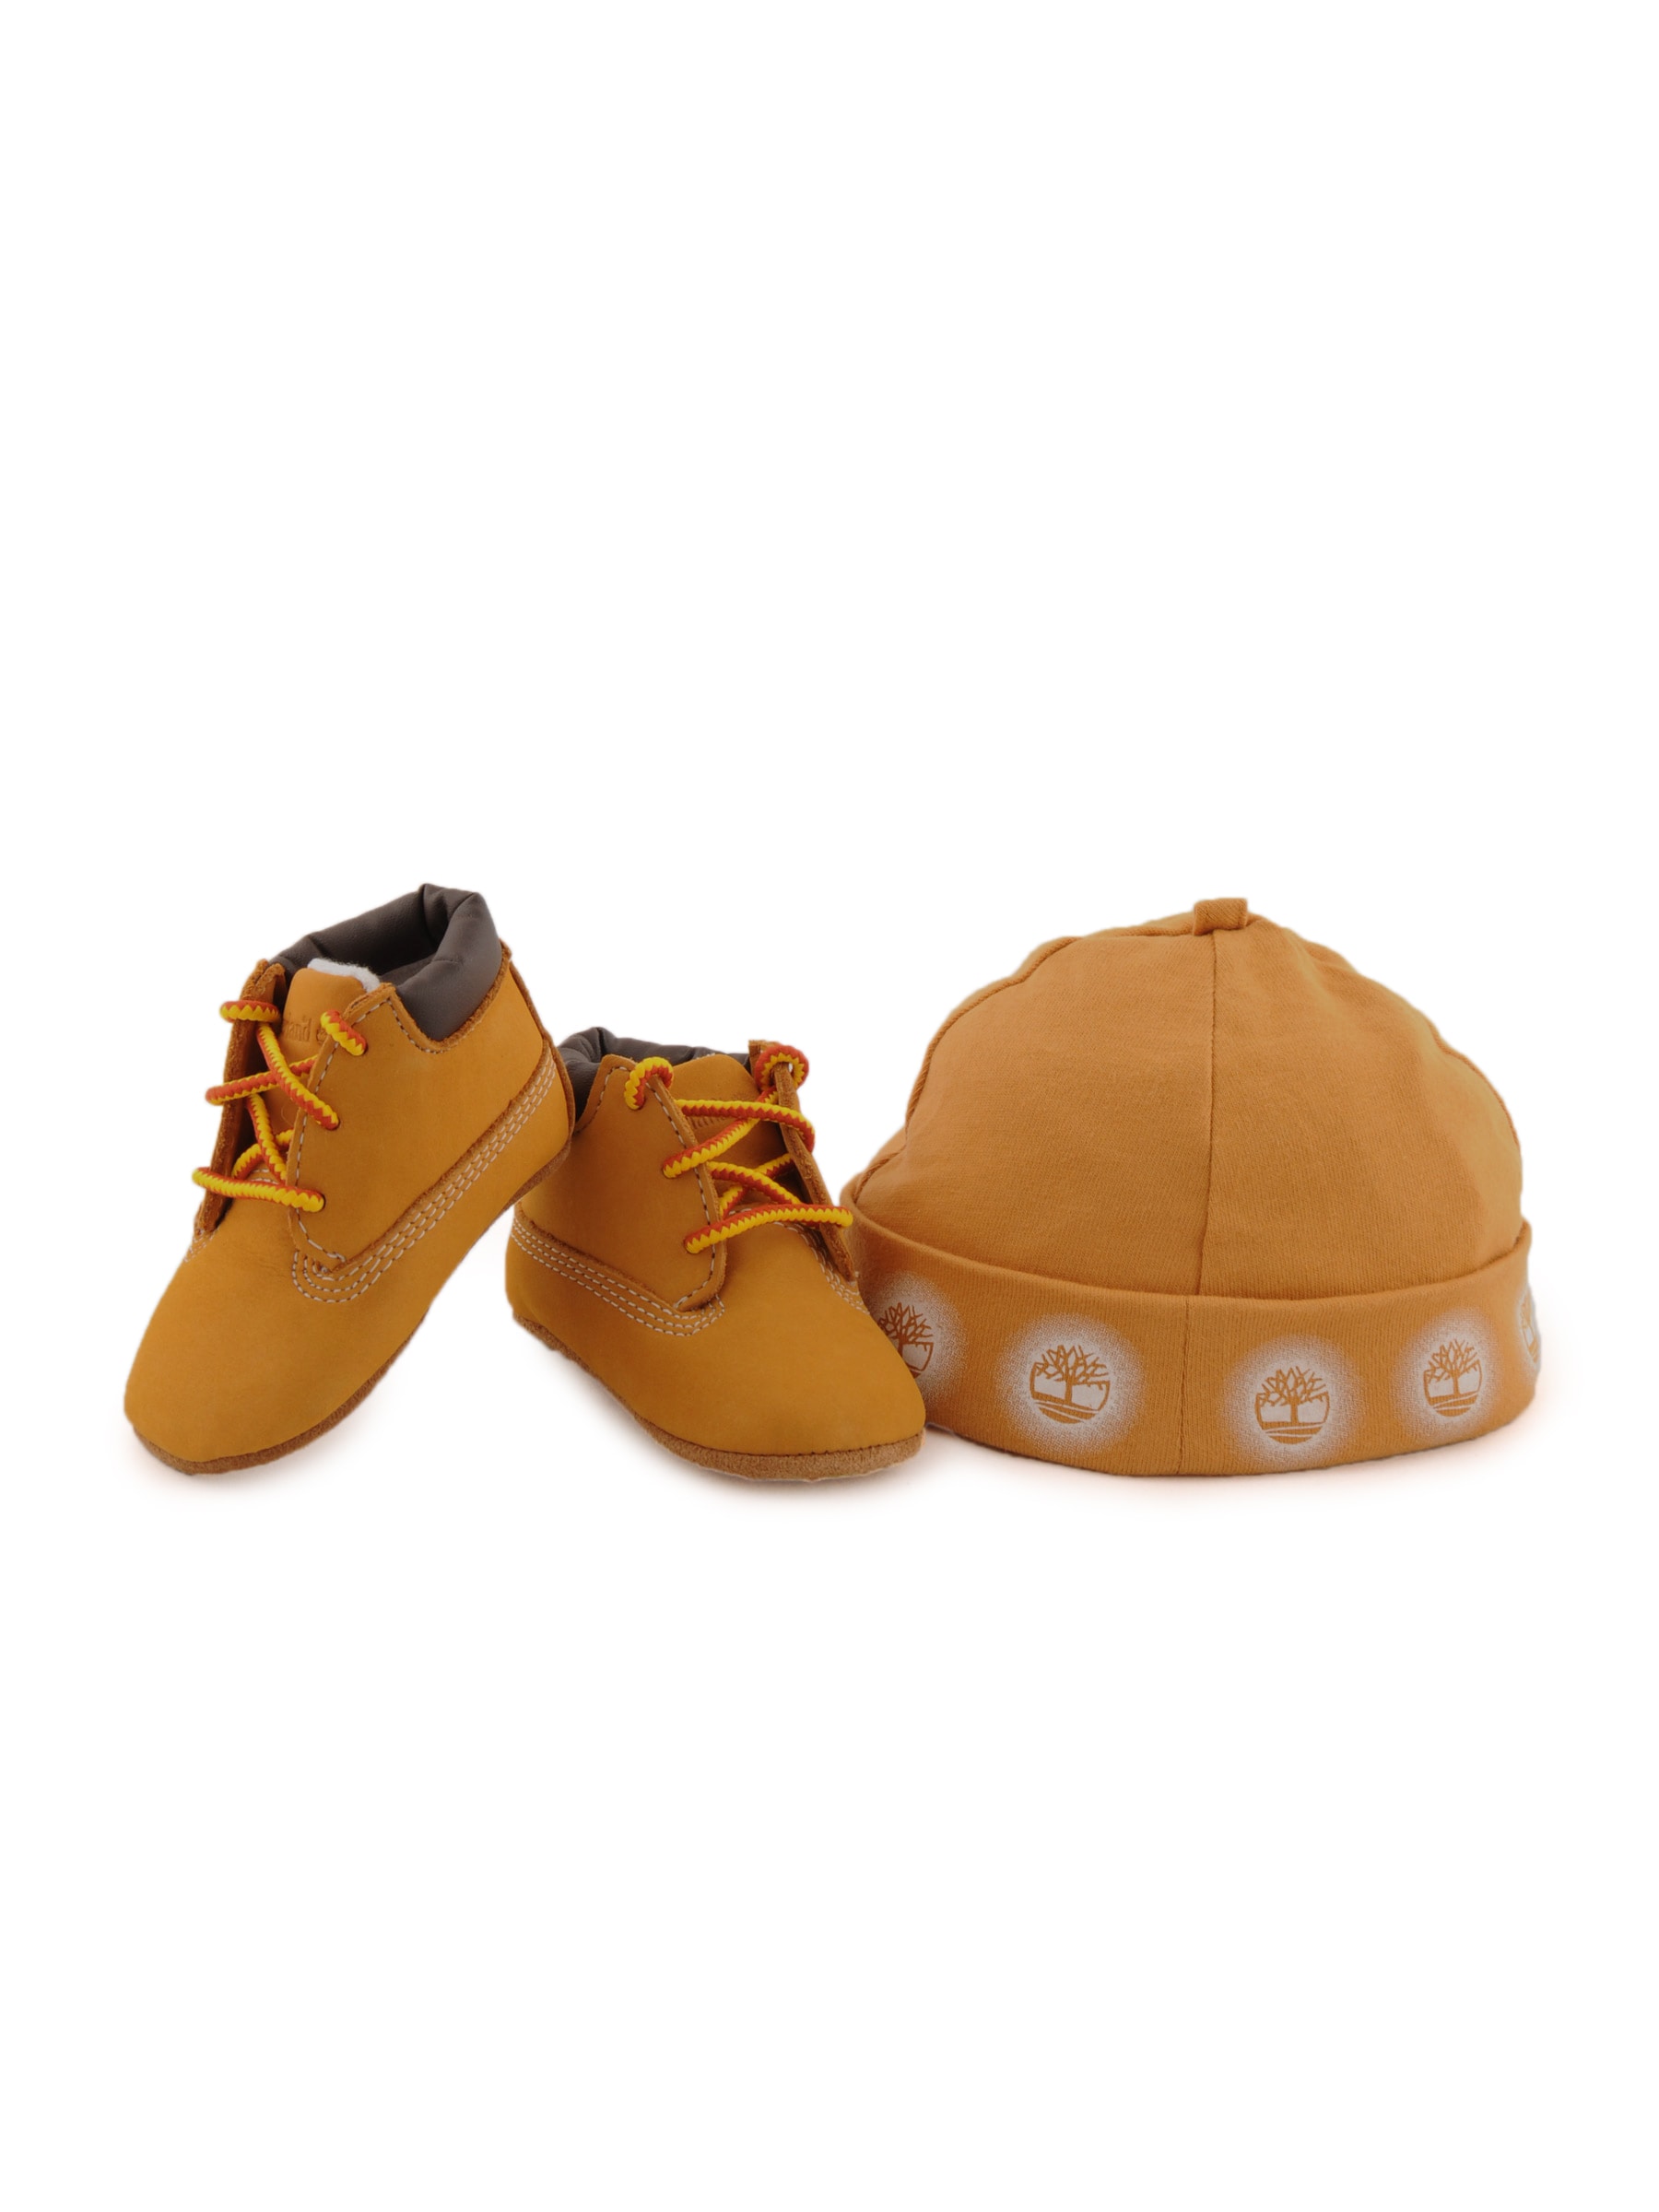 Timberland Unisex Casual Brown Casual Shoes